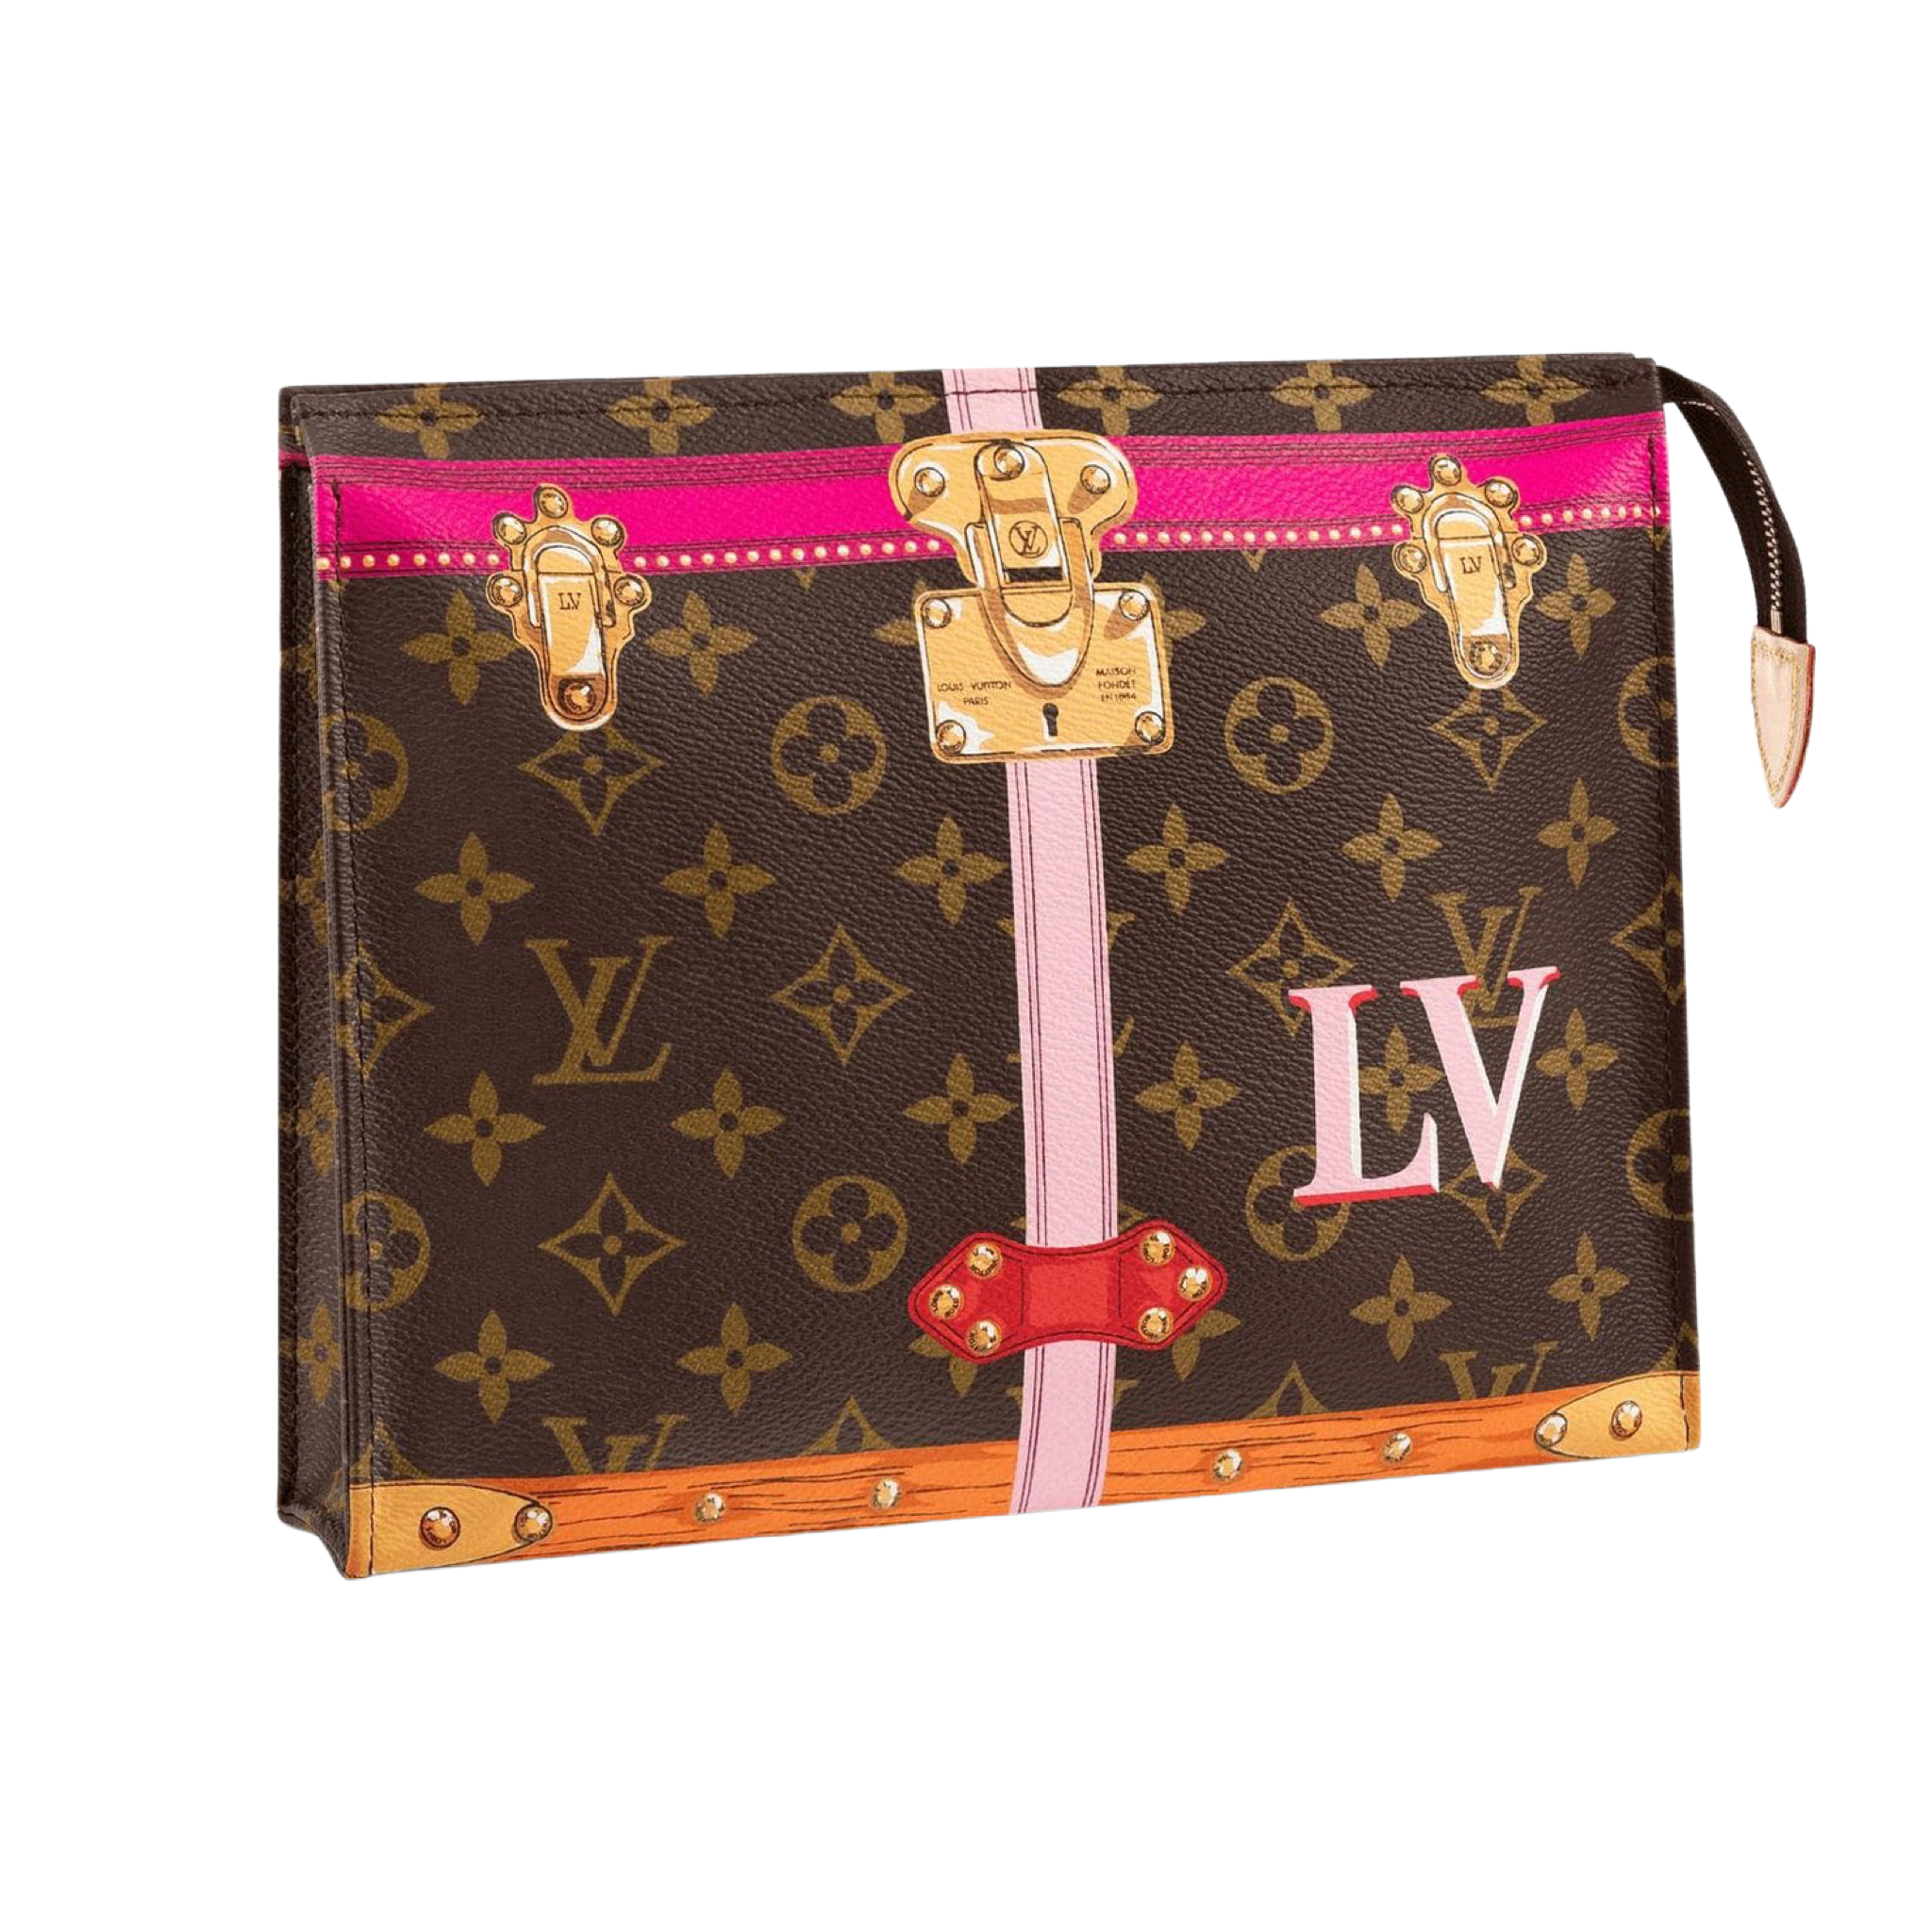 LOUIS VUITTON Monogram LIMITED EDITION Summer Trunks Toiletry Pouch 26